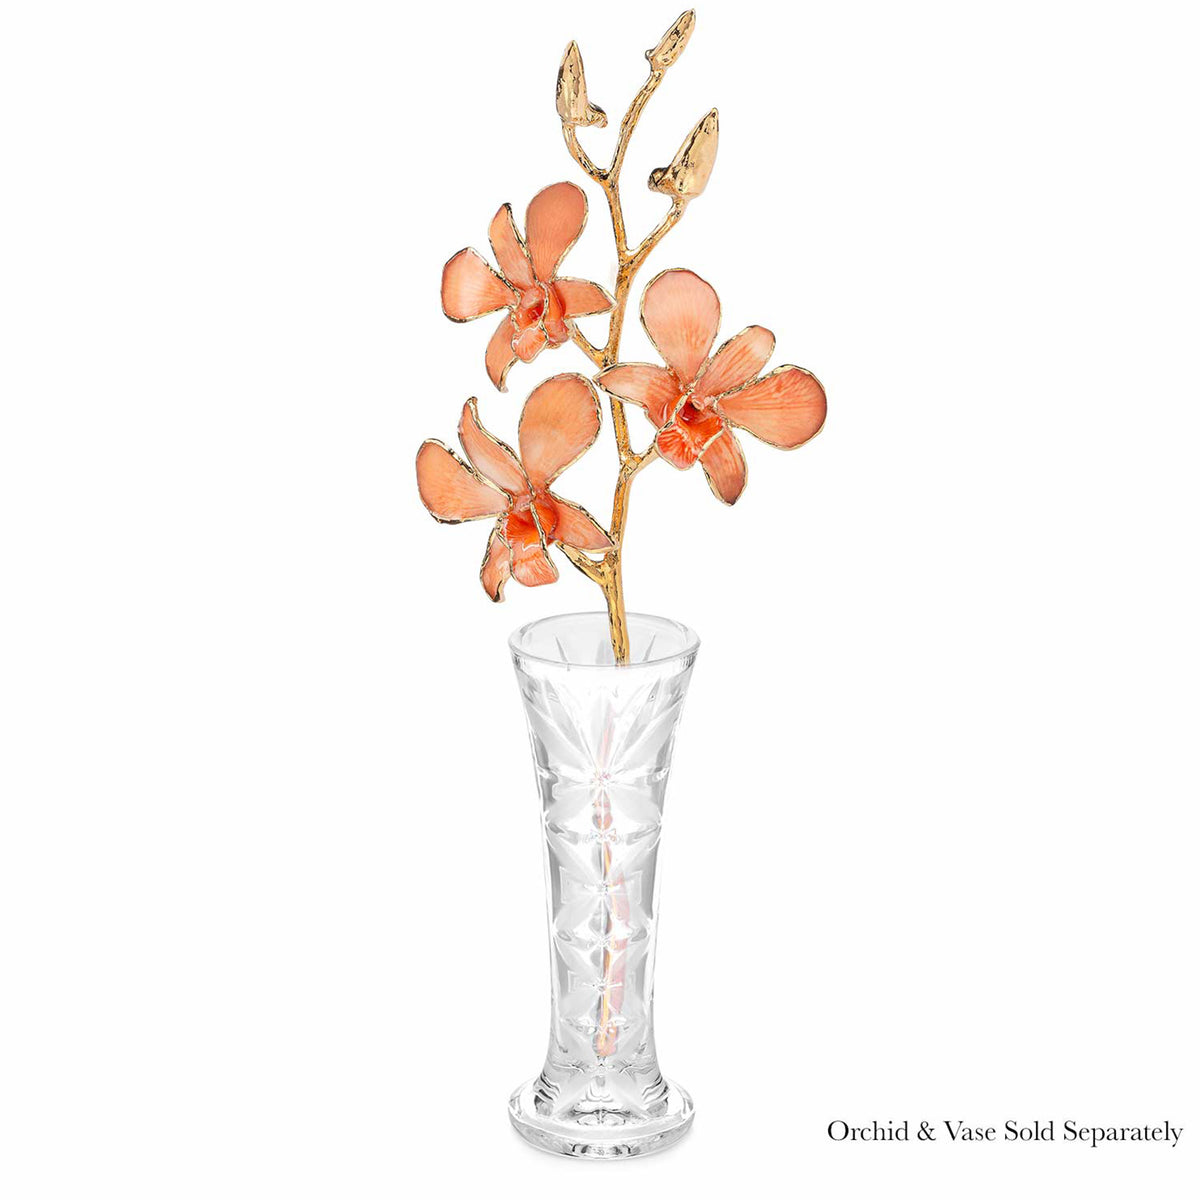 24K Gold Dipped Orchid in Peach view of gold stem and flowers in optional crystal bud vase